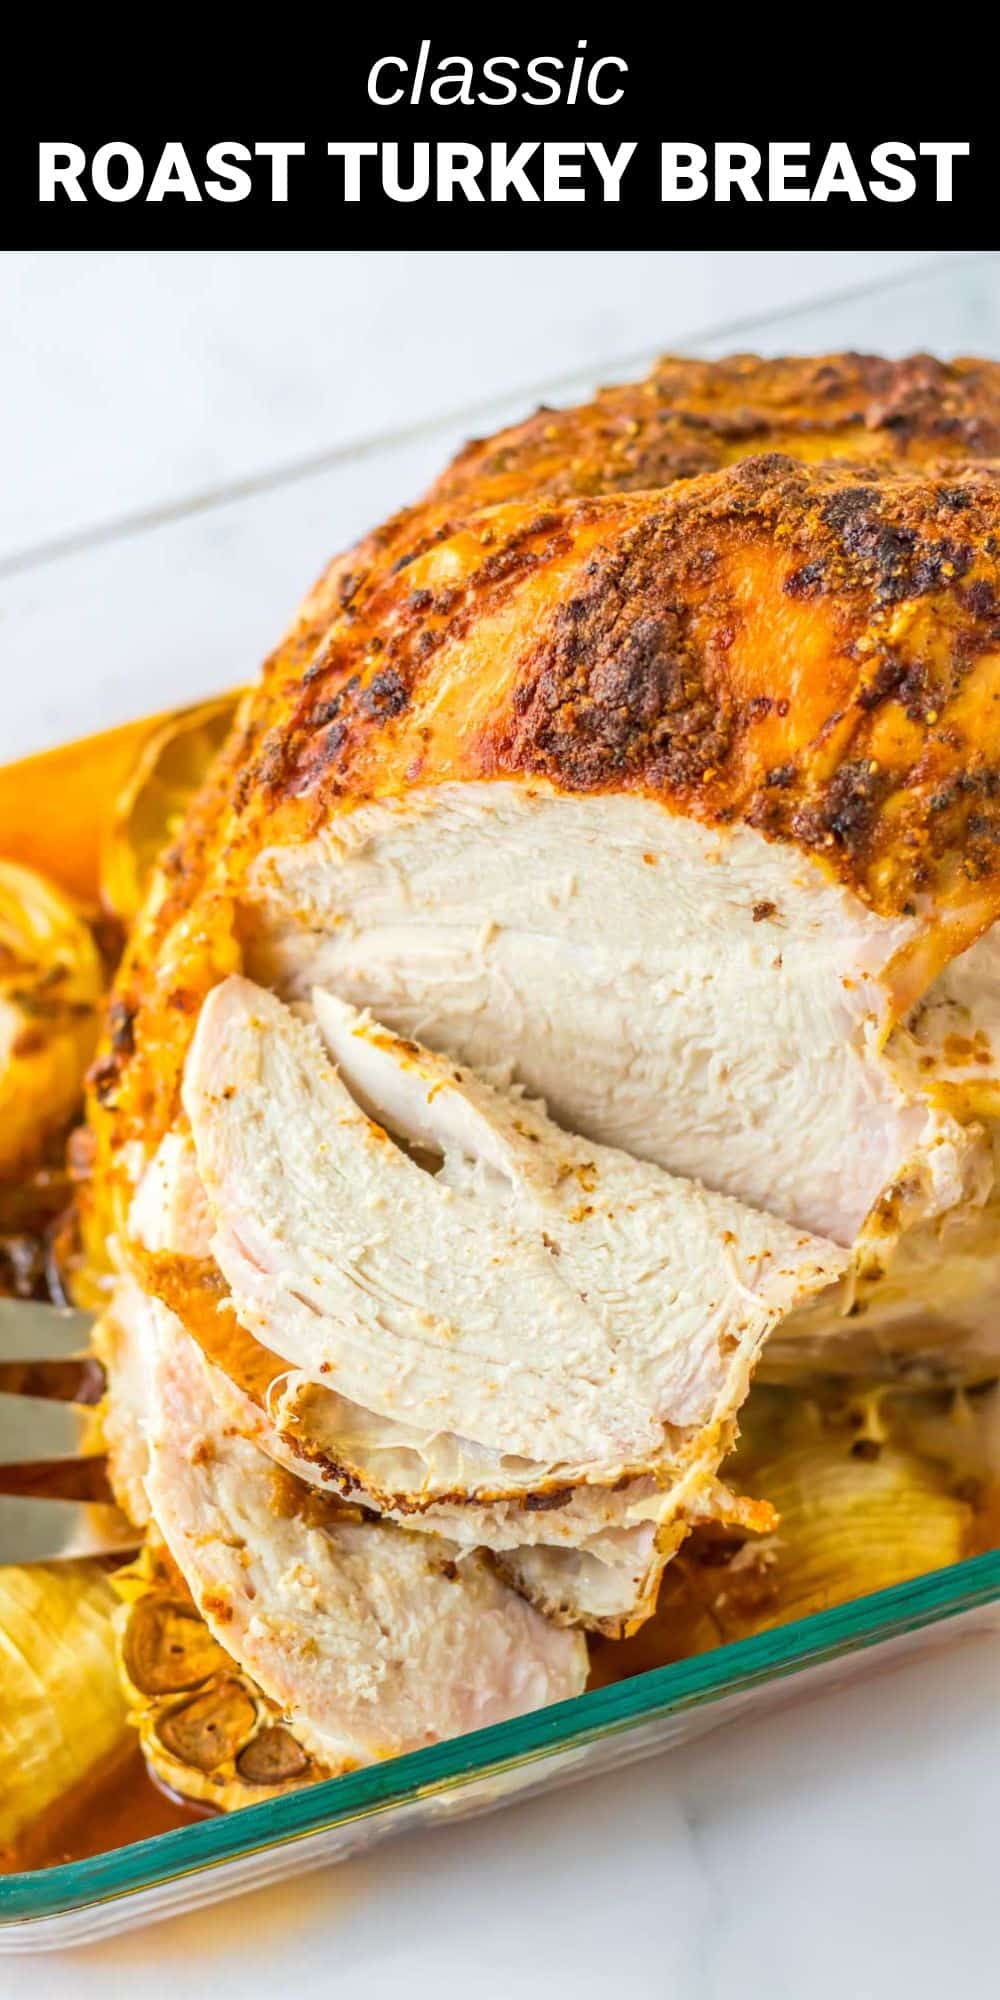 Everyone needs a recipe for a Classic Roast Turkey Breast and this one is perfect. The turkey always comes out nice and juicy and perfectly seasoned. This a great alternative to cooking a whole turkey and is also perfect for smaller gatherings.